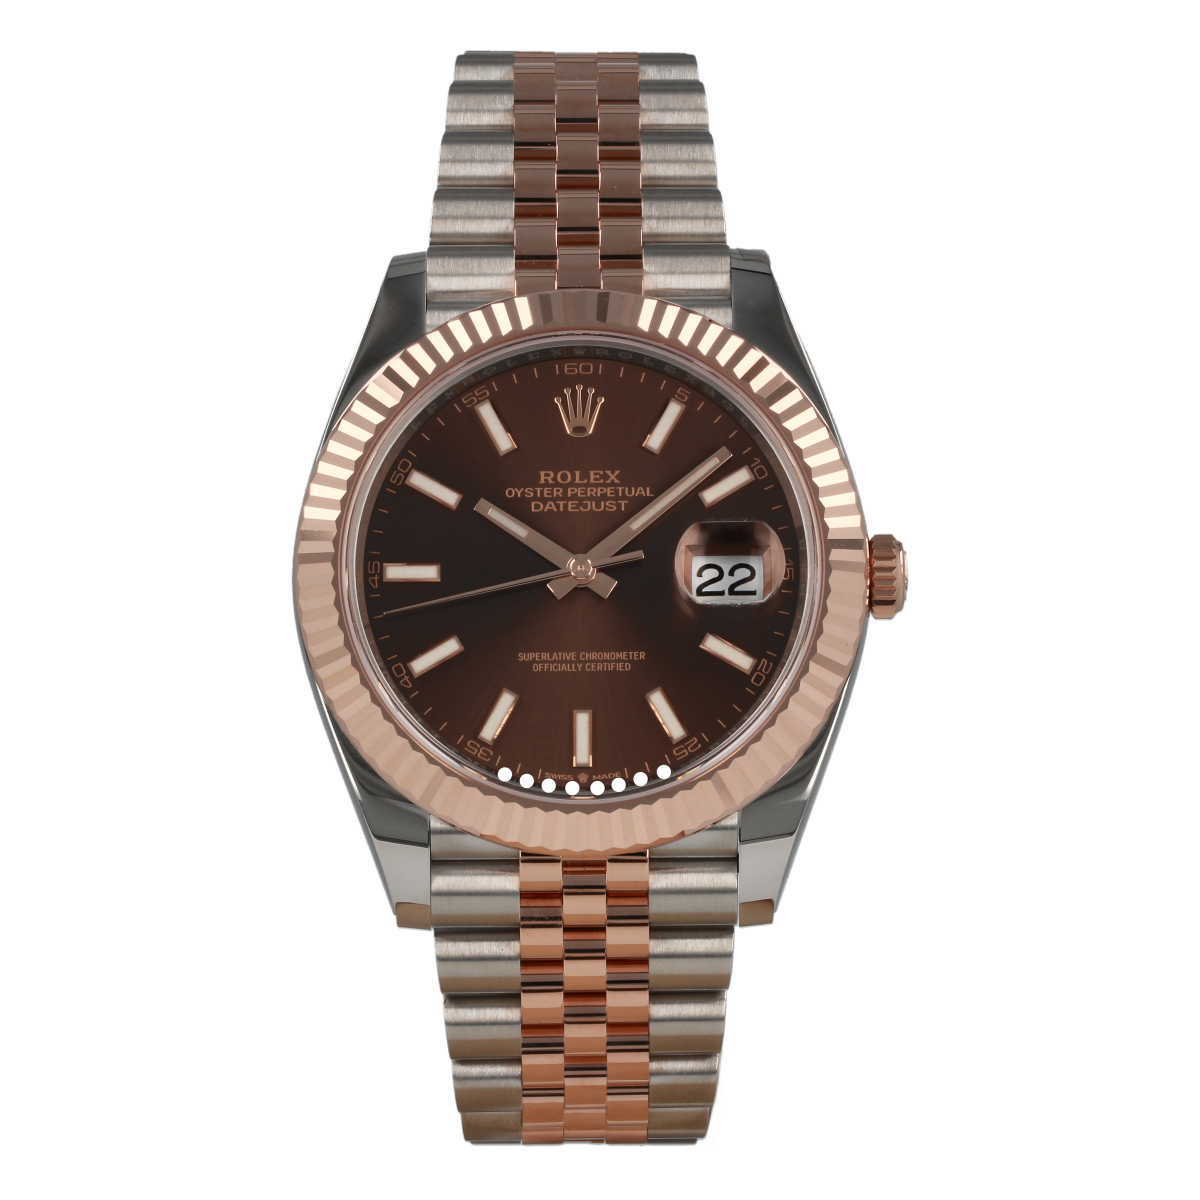 Rolex Datejust 126331 41mm Chocolate Dial Steel and Everose Gold *Brand-New* | Buy pre-owned Rolex watch